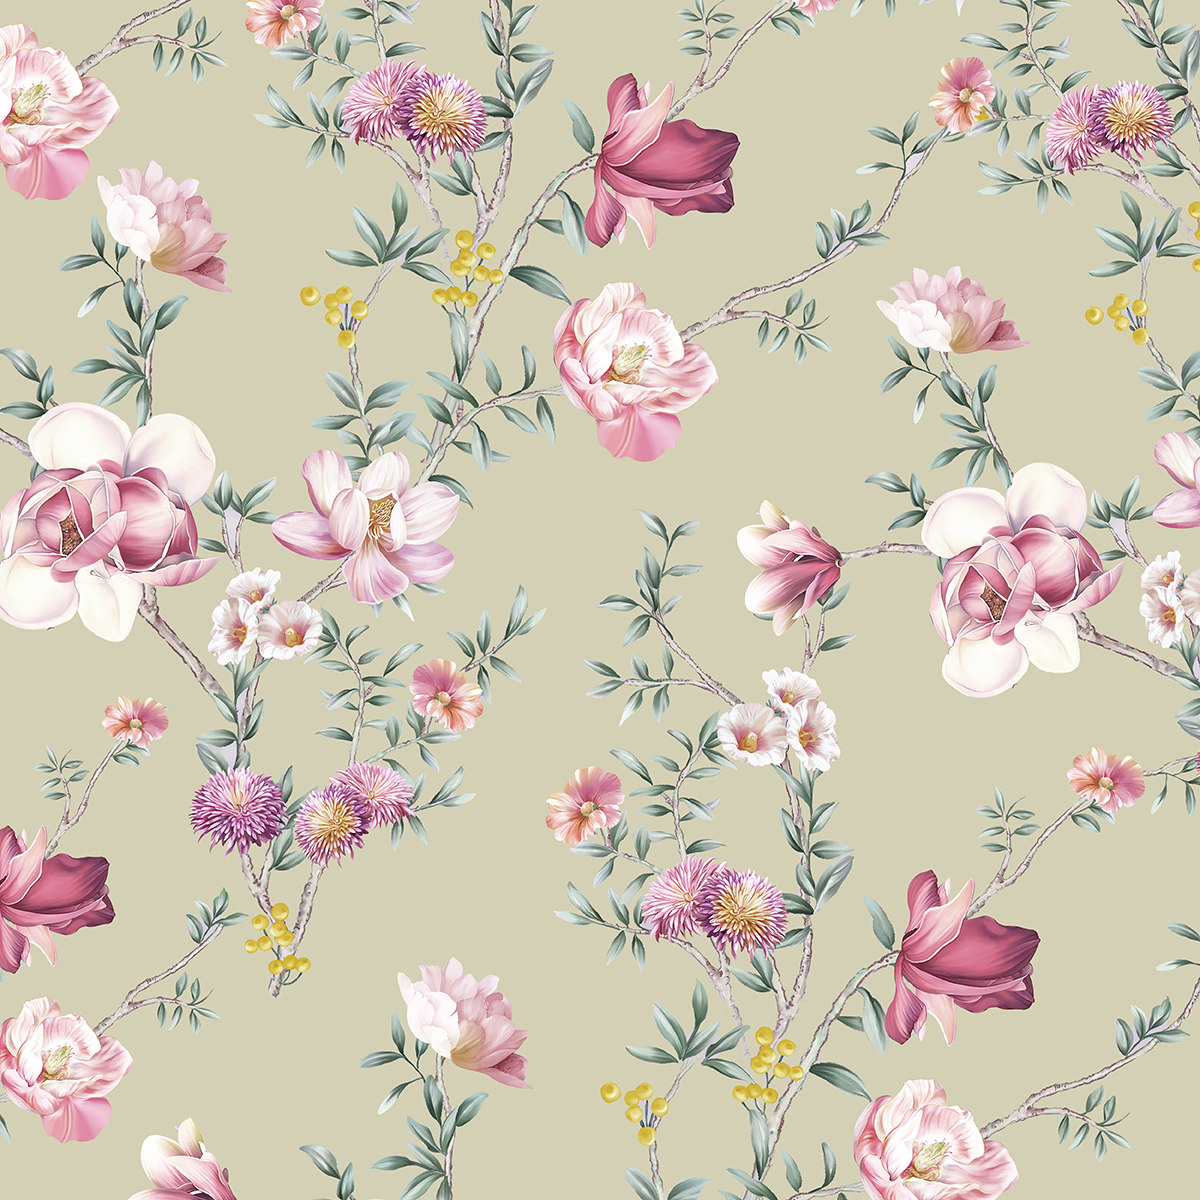 A pattern of flowers on a beige background